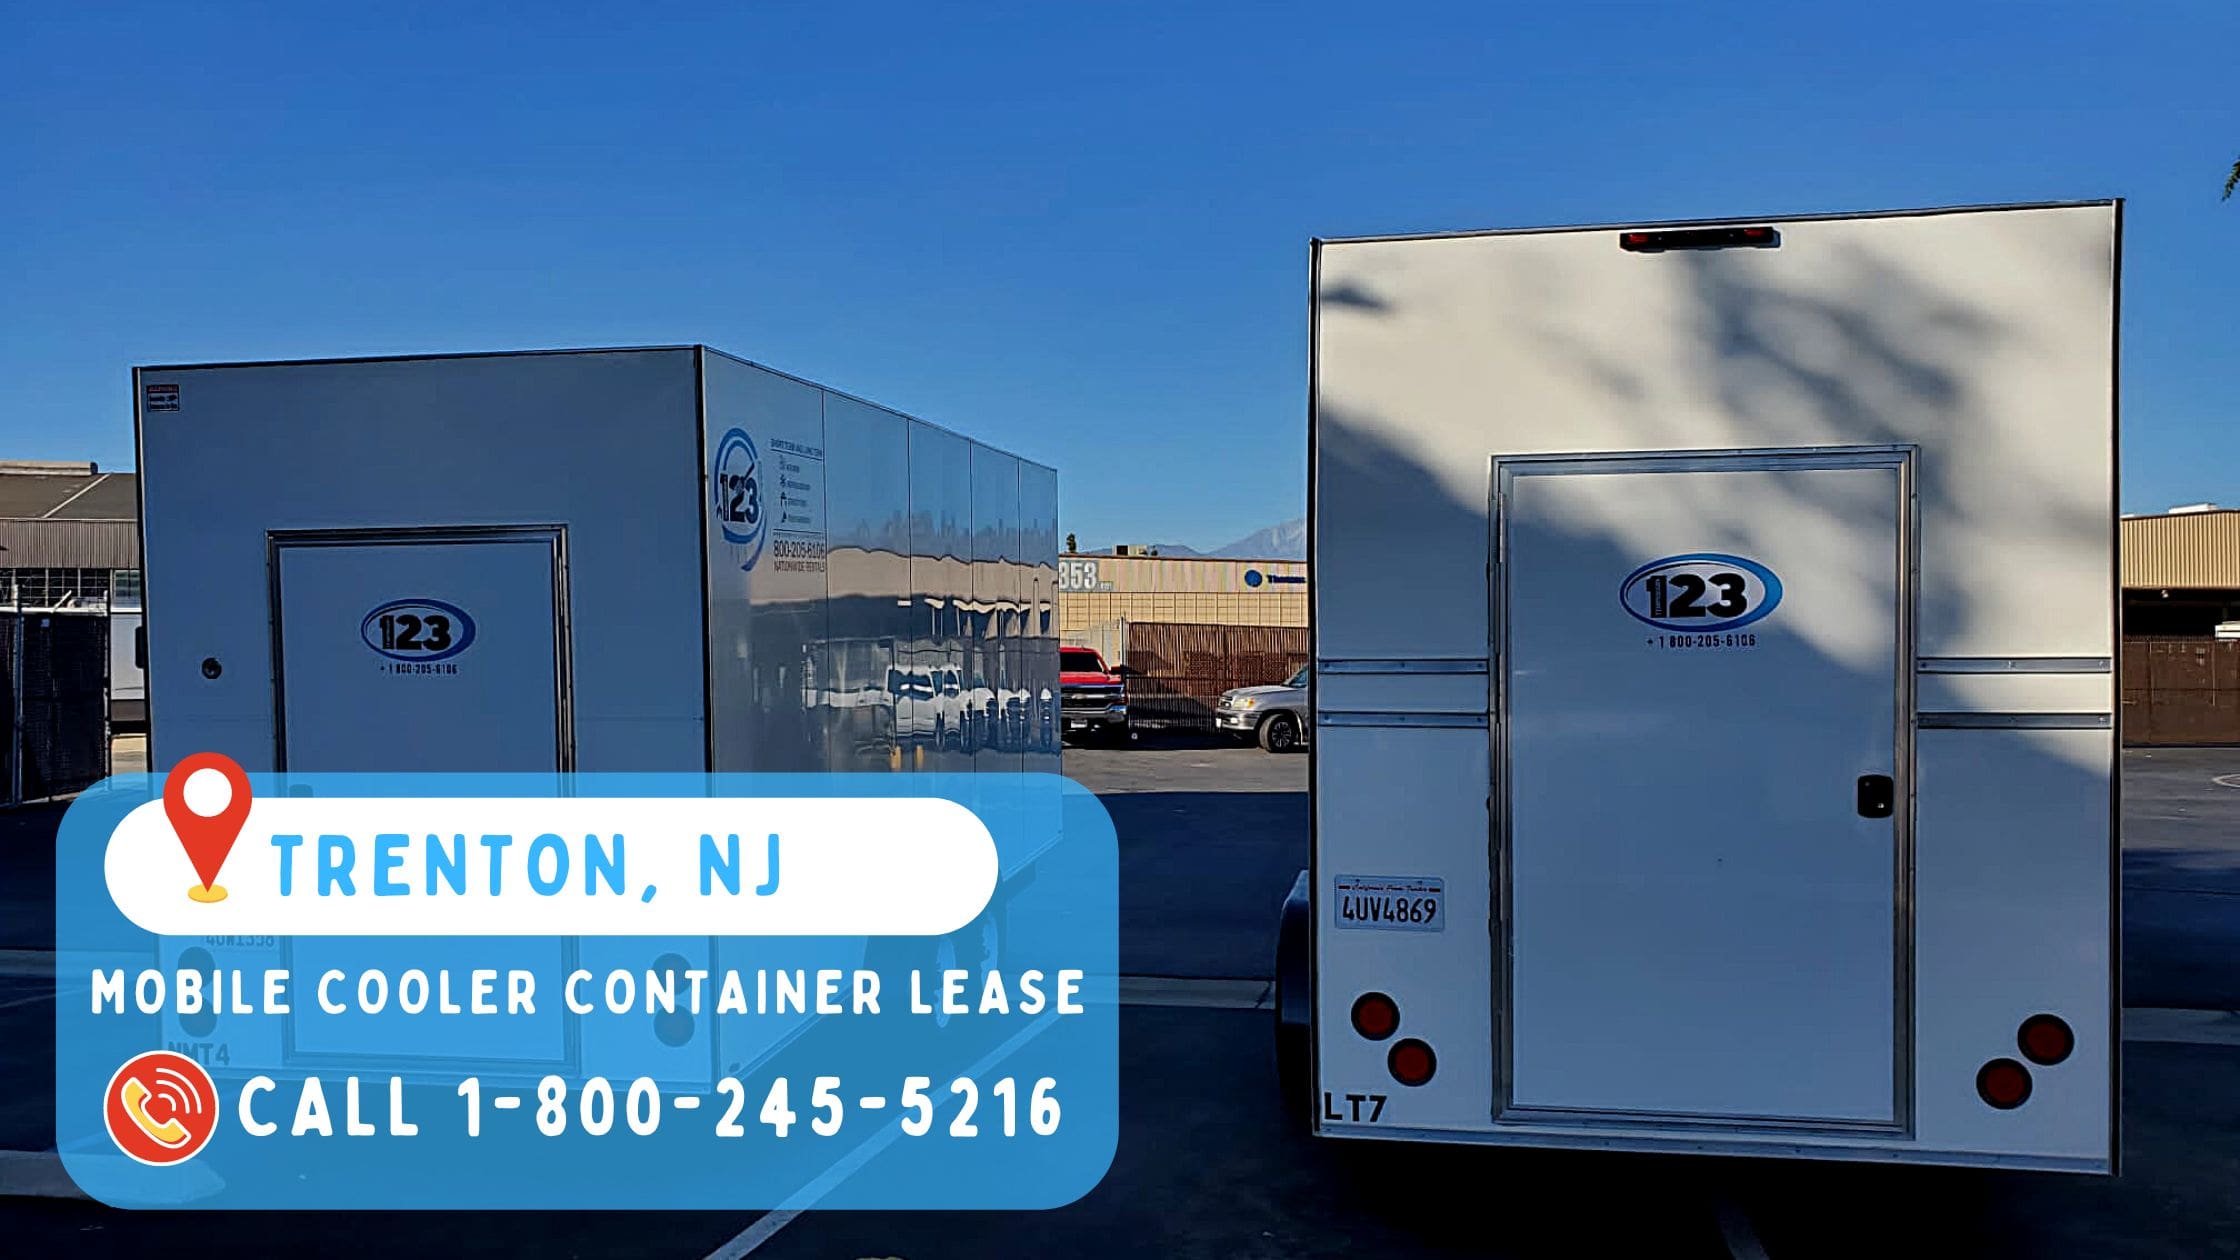 Mobile Cooler Container Lease in Trenton